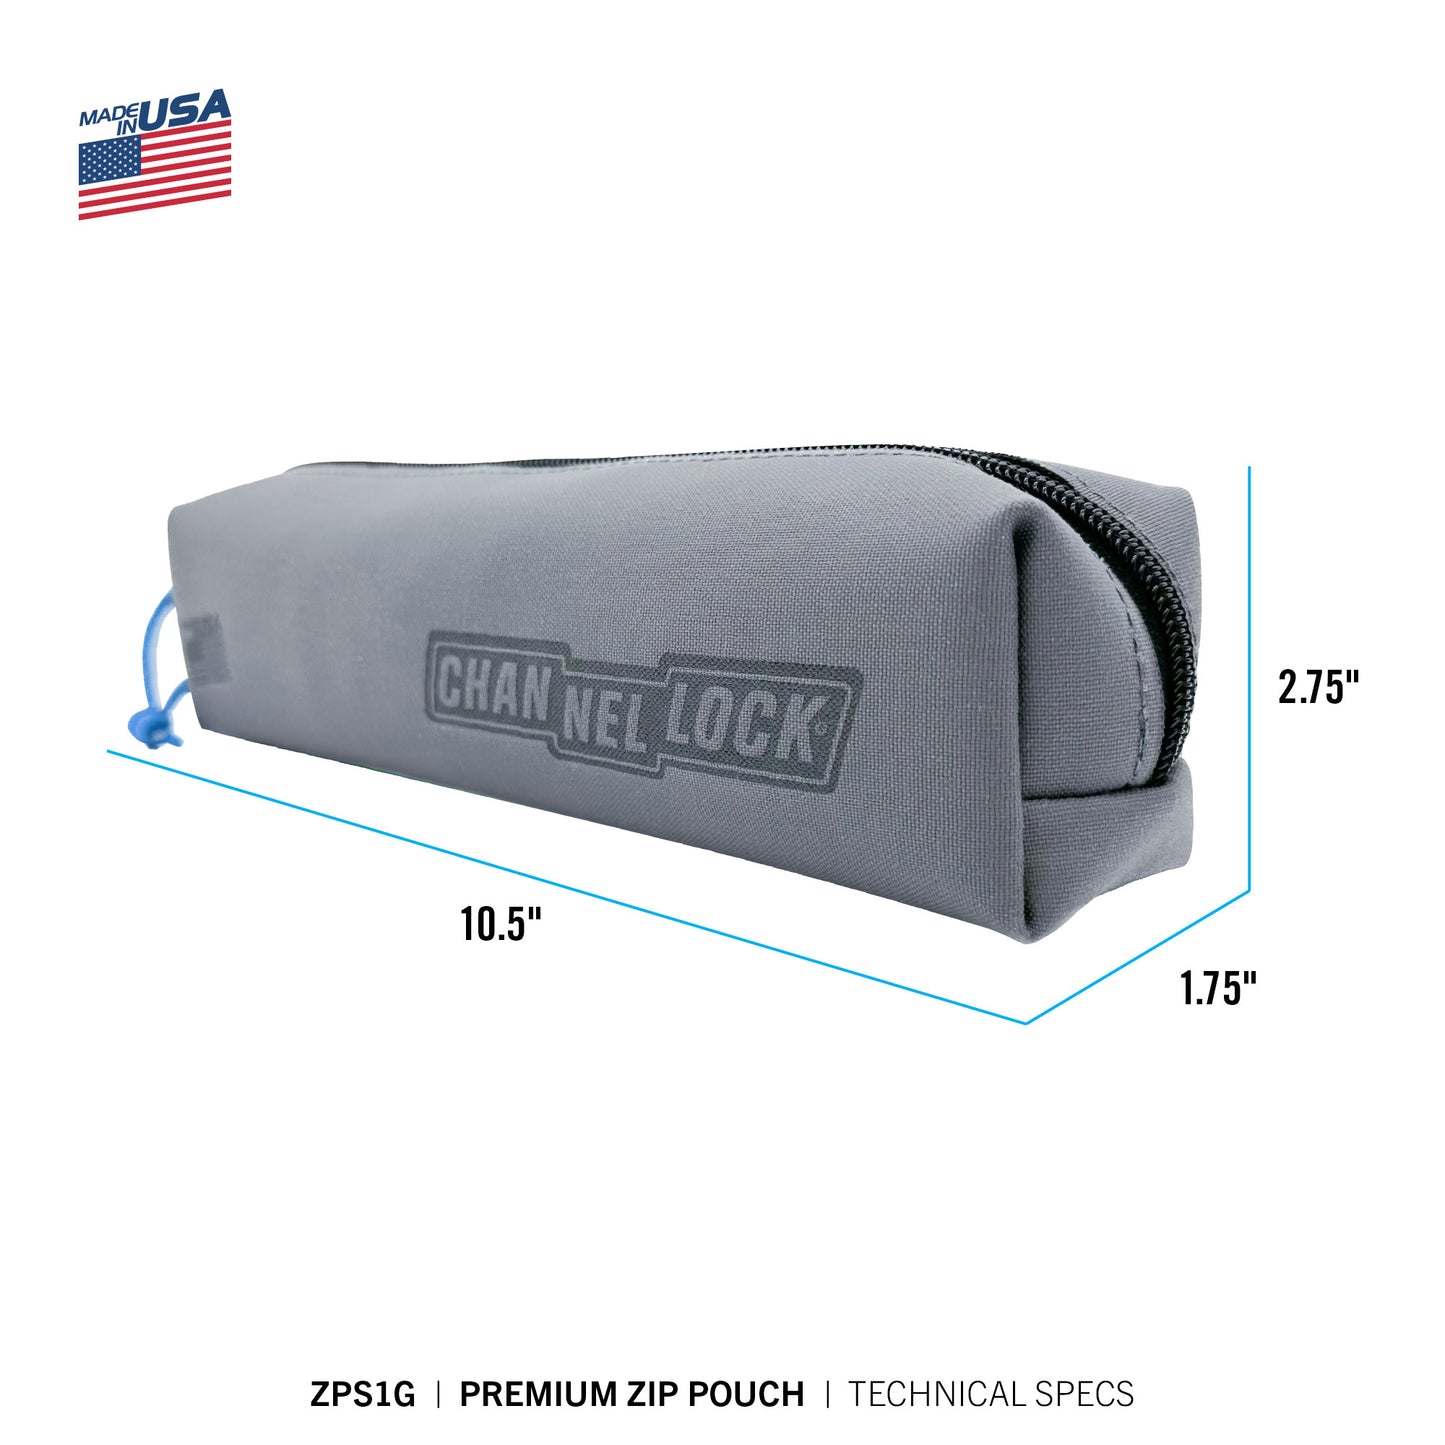 Premium Single Zip Pouch with LASERLOCK Fabric™ and 6/12™ Compatible (ZPS1G)